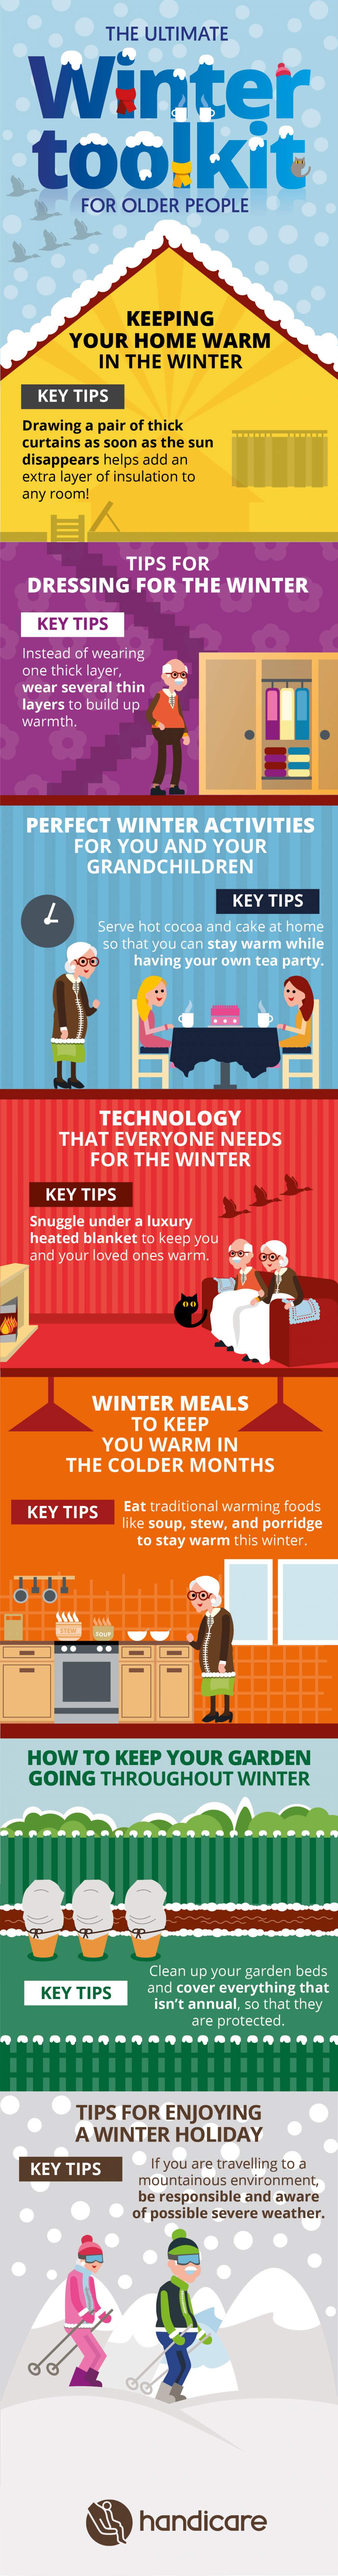 Winter Toolkit for Older People